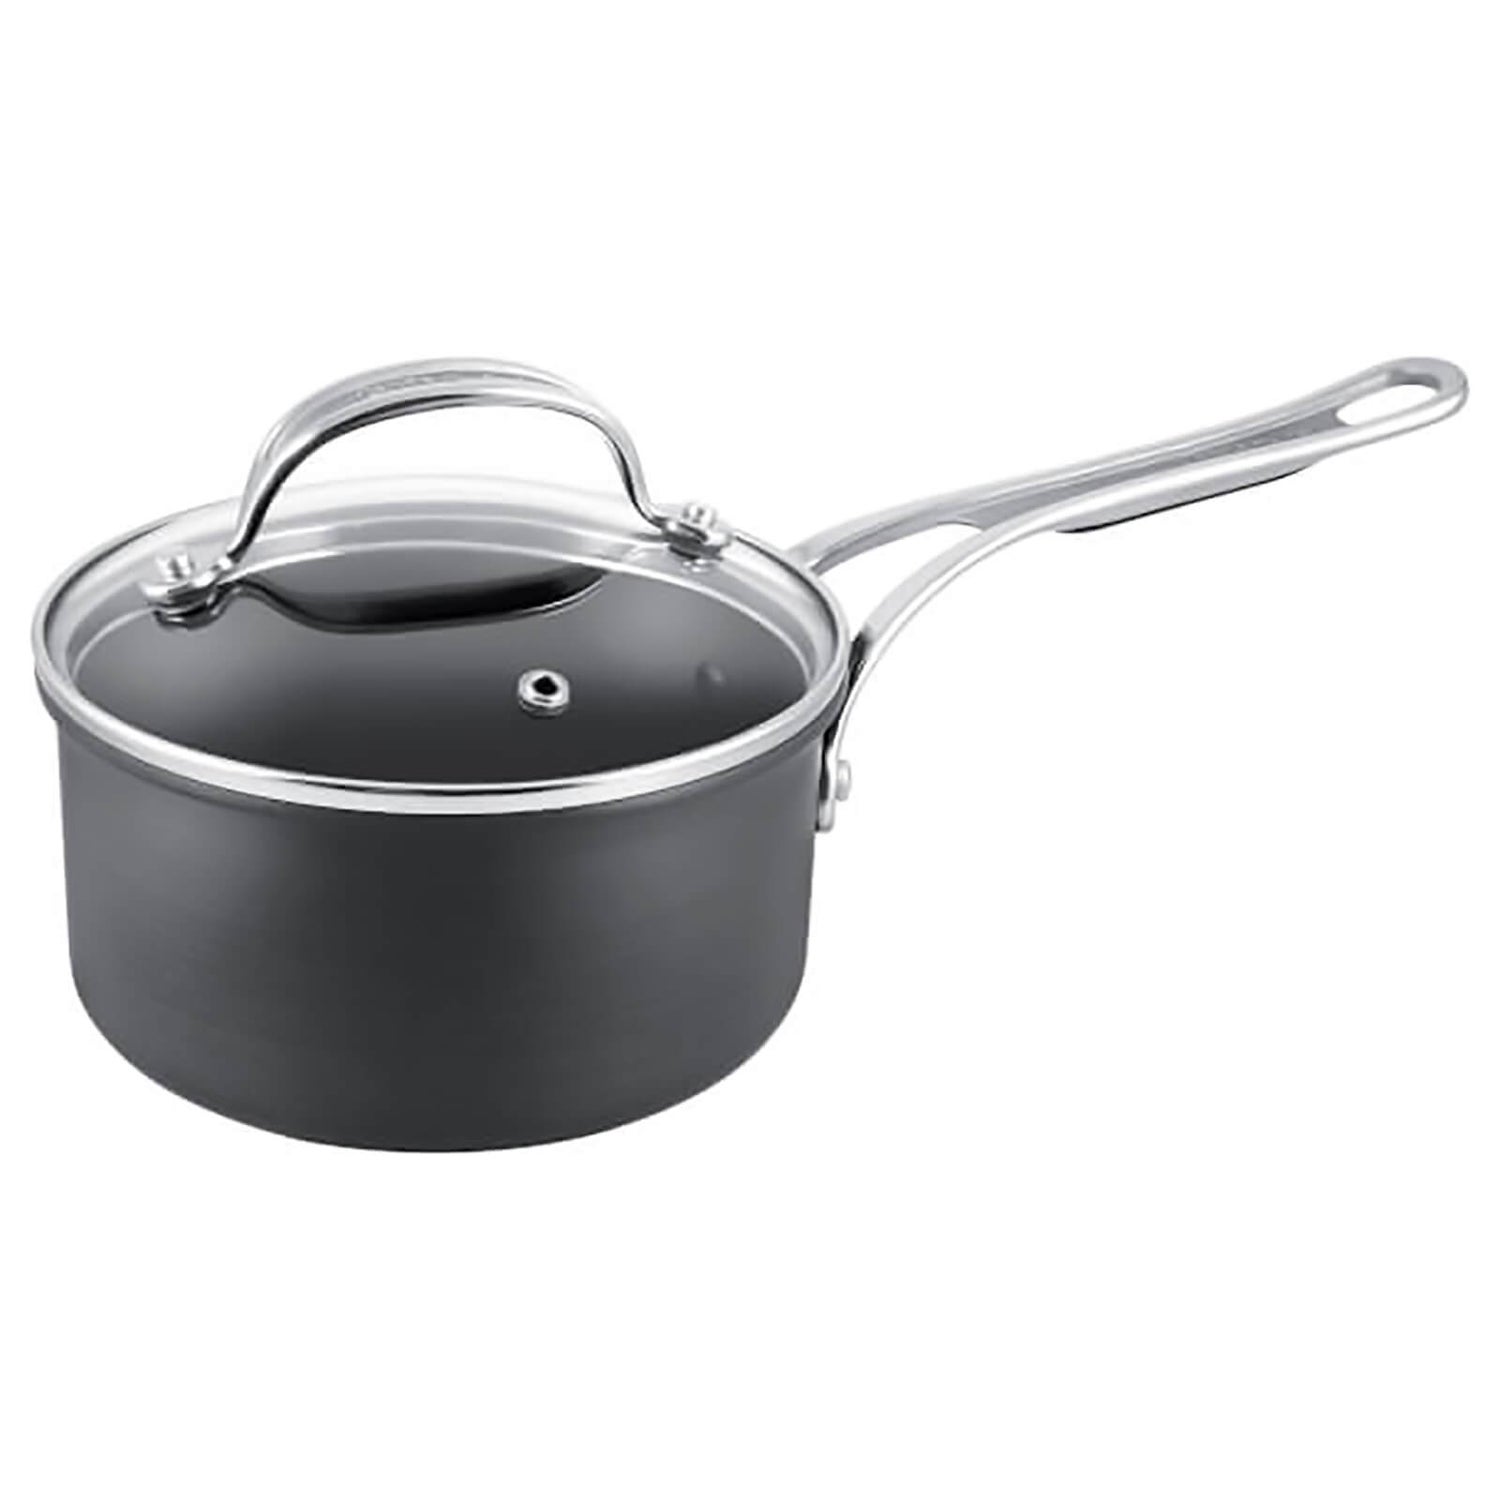 Jamie Oliver by Tefal Hard Anodised Aluminium Non-Stick Saucepan Set with  Lids, 3 Piece